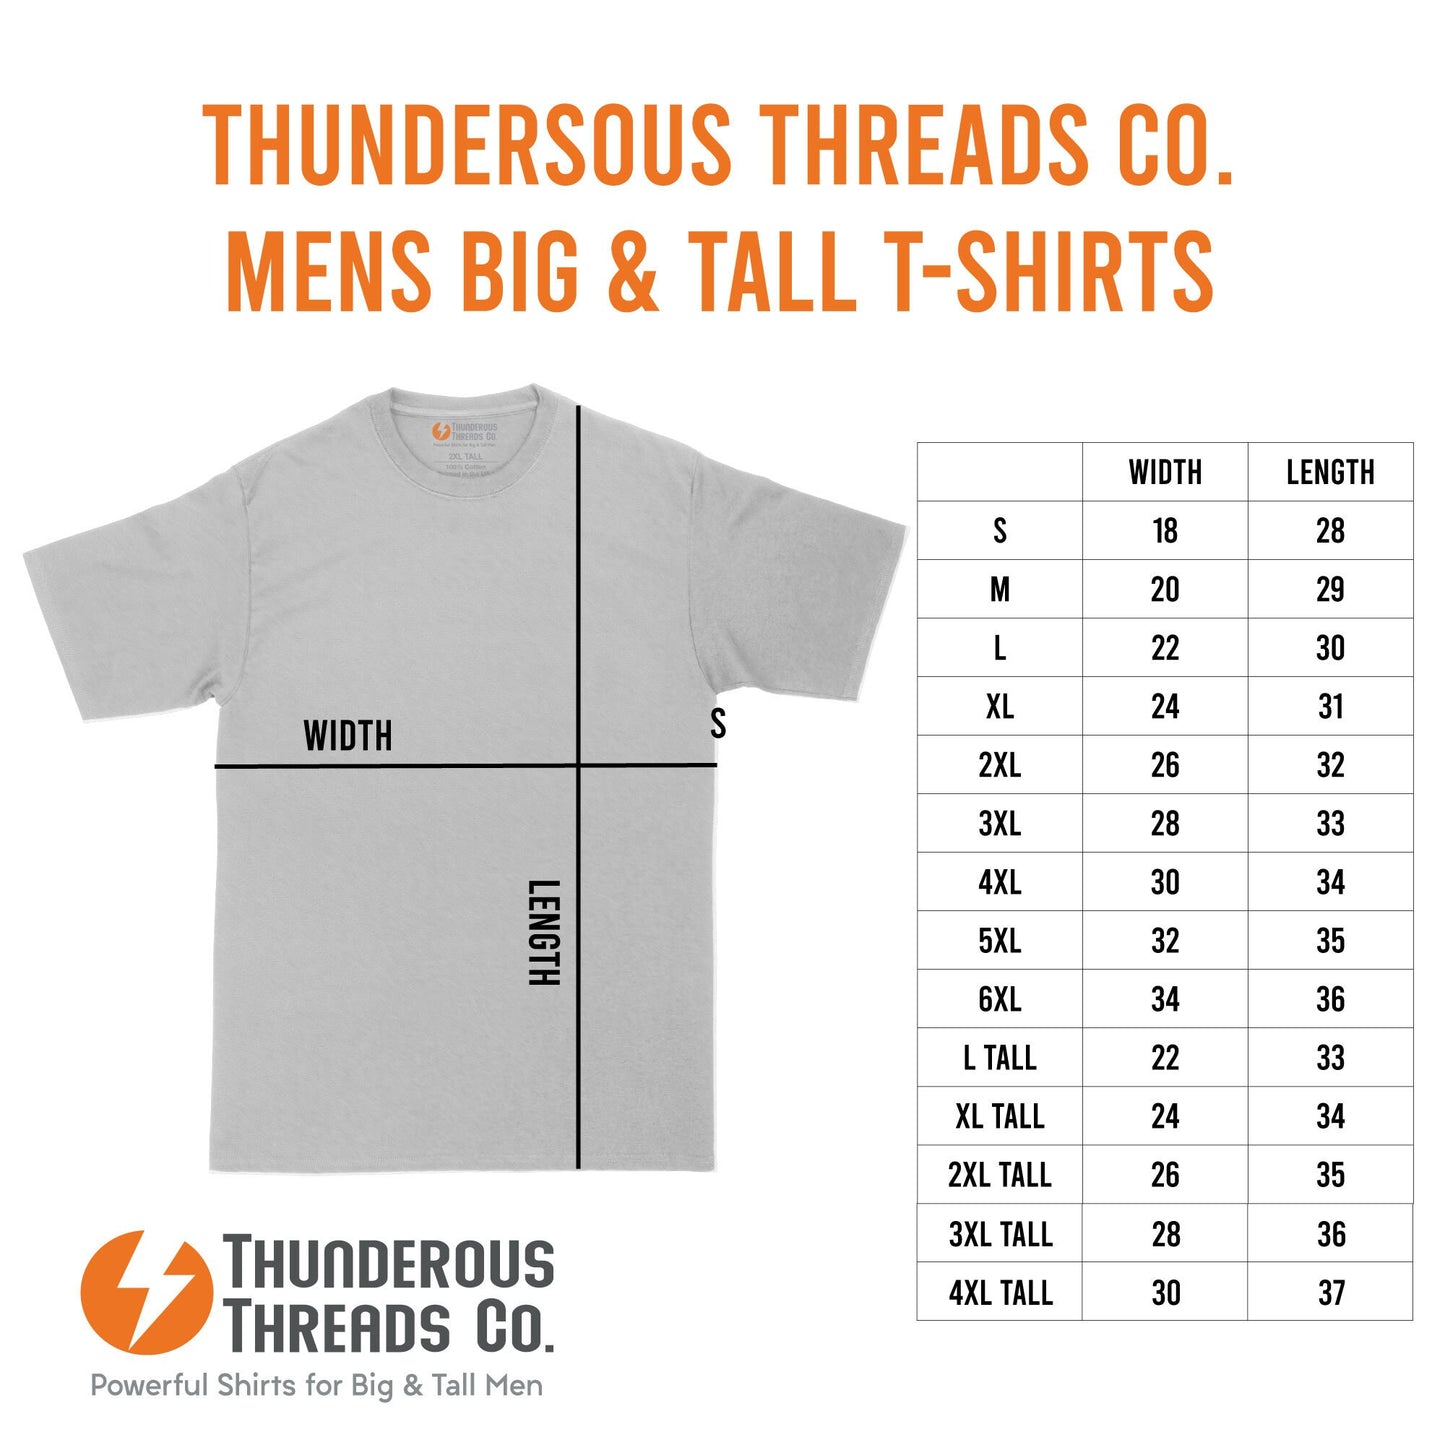 I Quit - Seriously Consider this My Two Weeks Notice | Mens Big & Tall Short Sleeve T-Shirt | Thunderous Threads Co